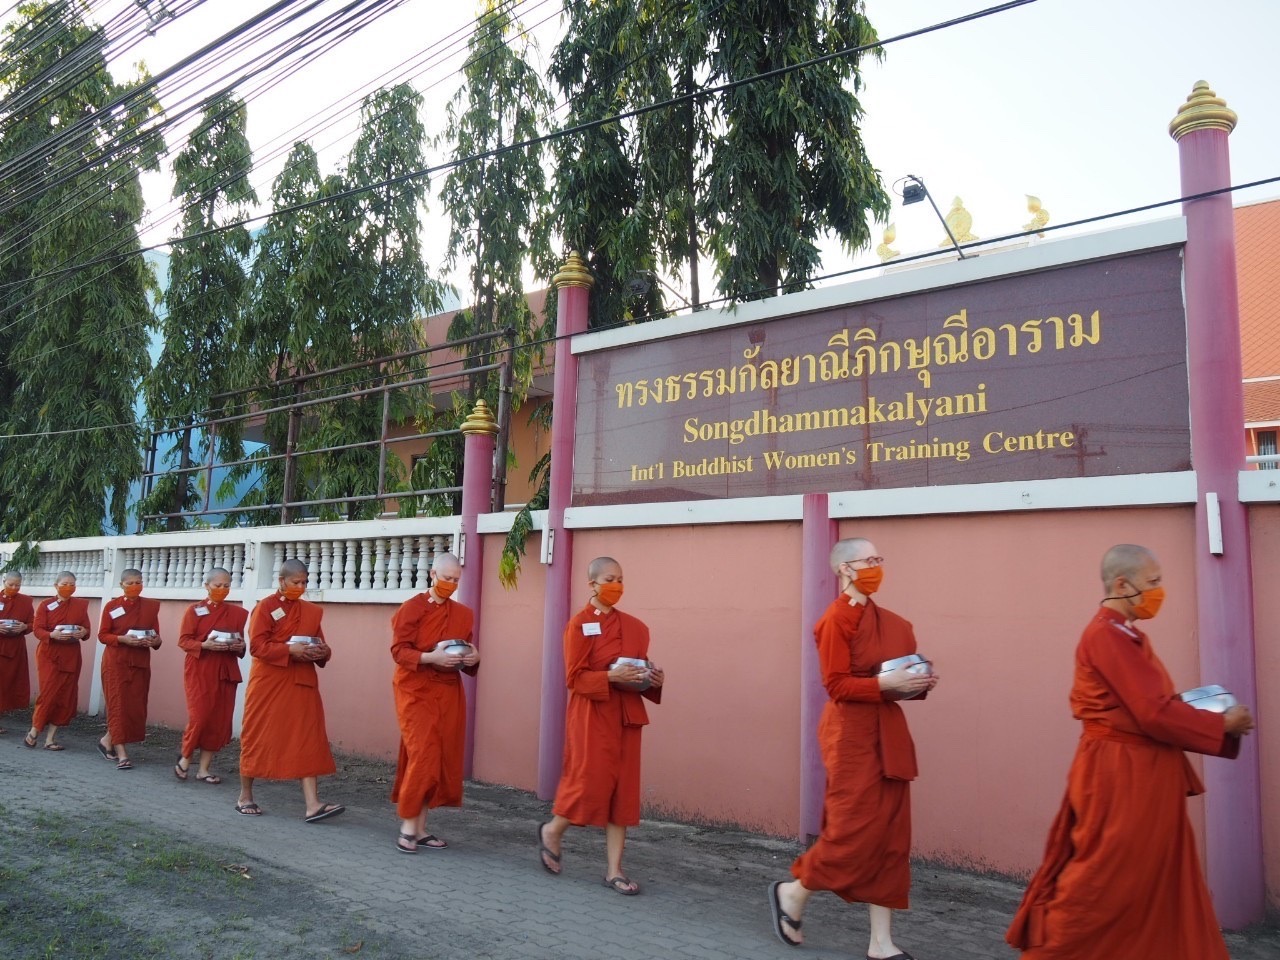 Katherine Scahill and other novice female monks walk near the monastery in Thailand.